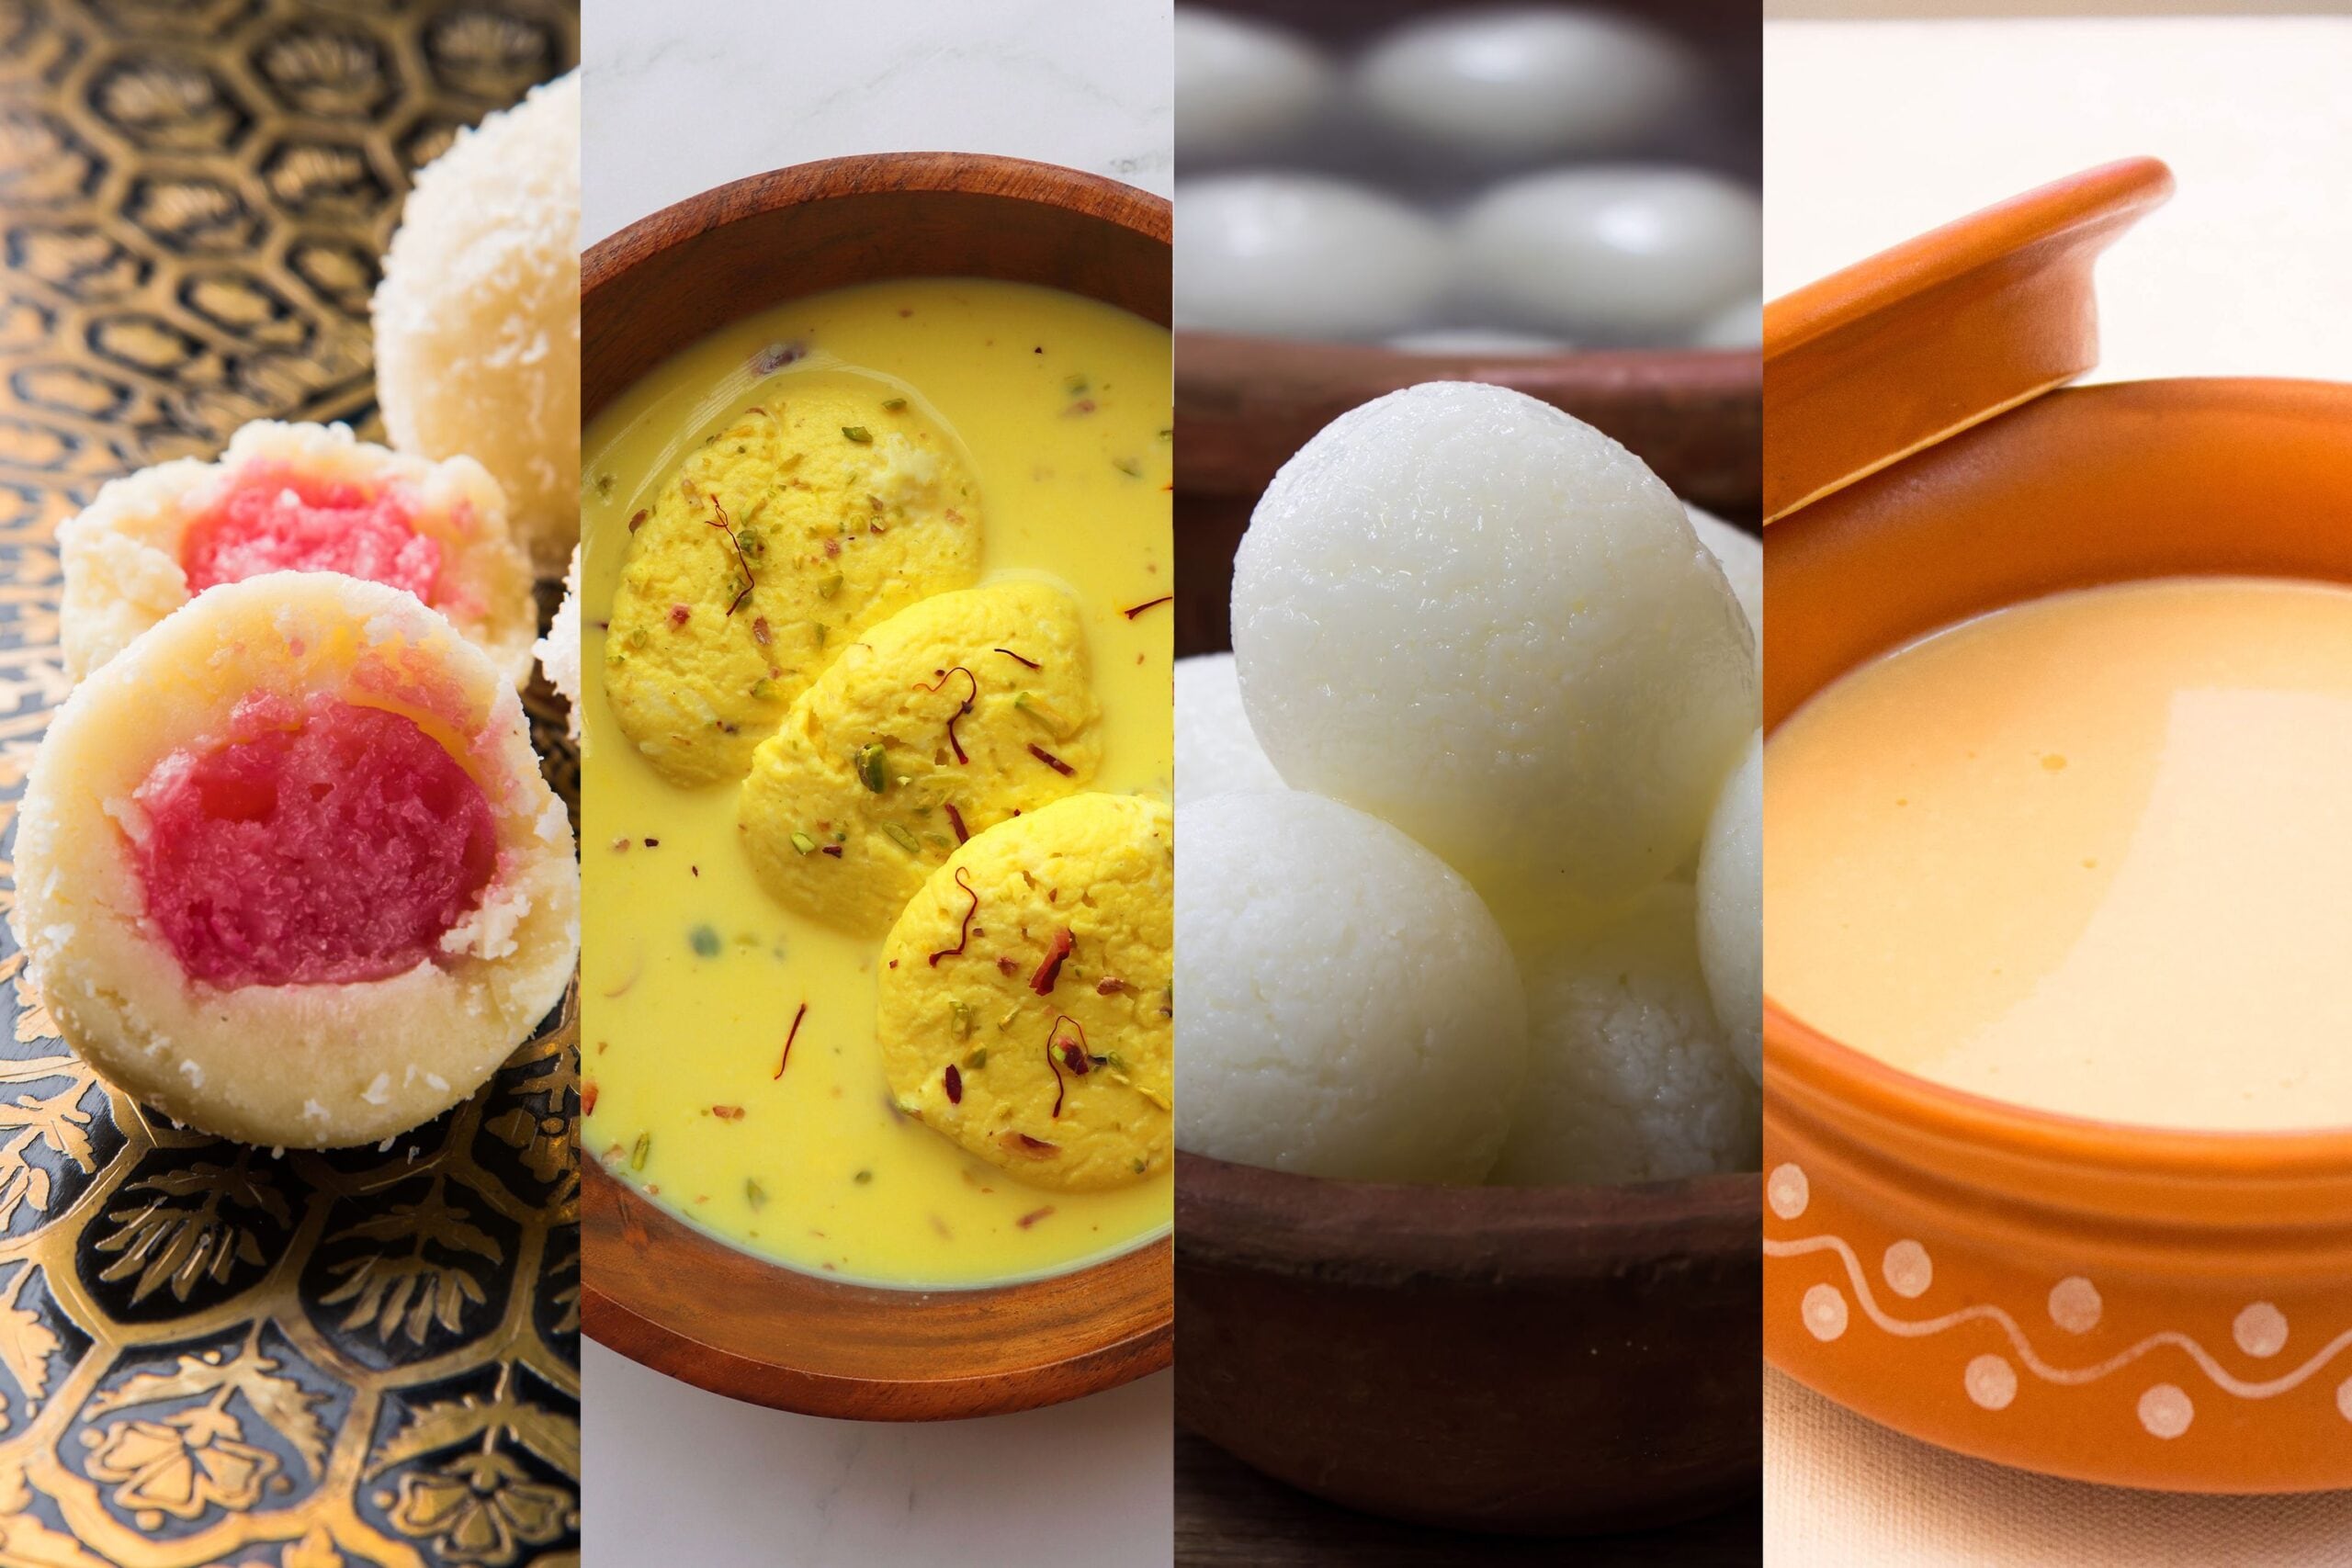 Bengali sweets are good for your soul. What is your go to Bengali sweet? 